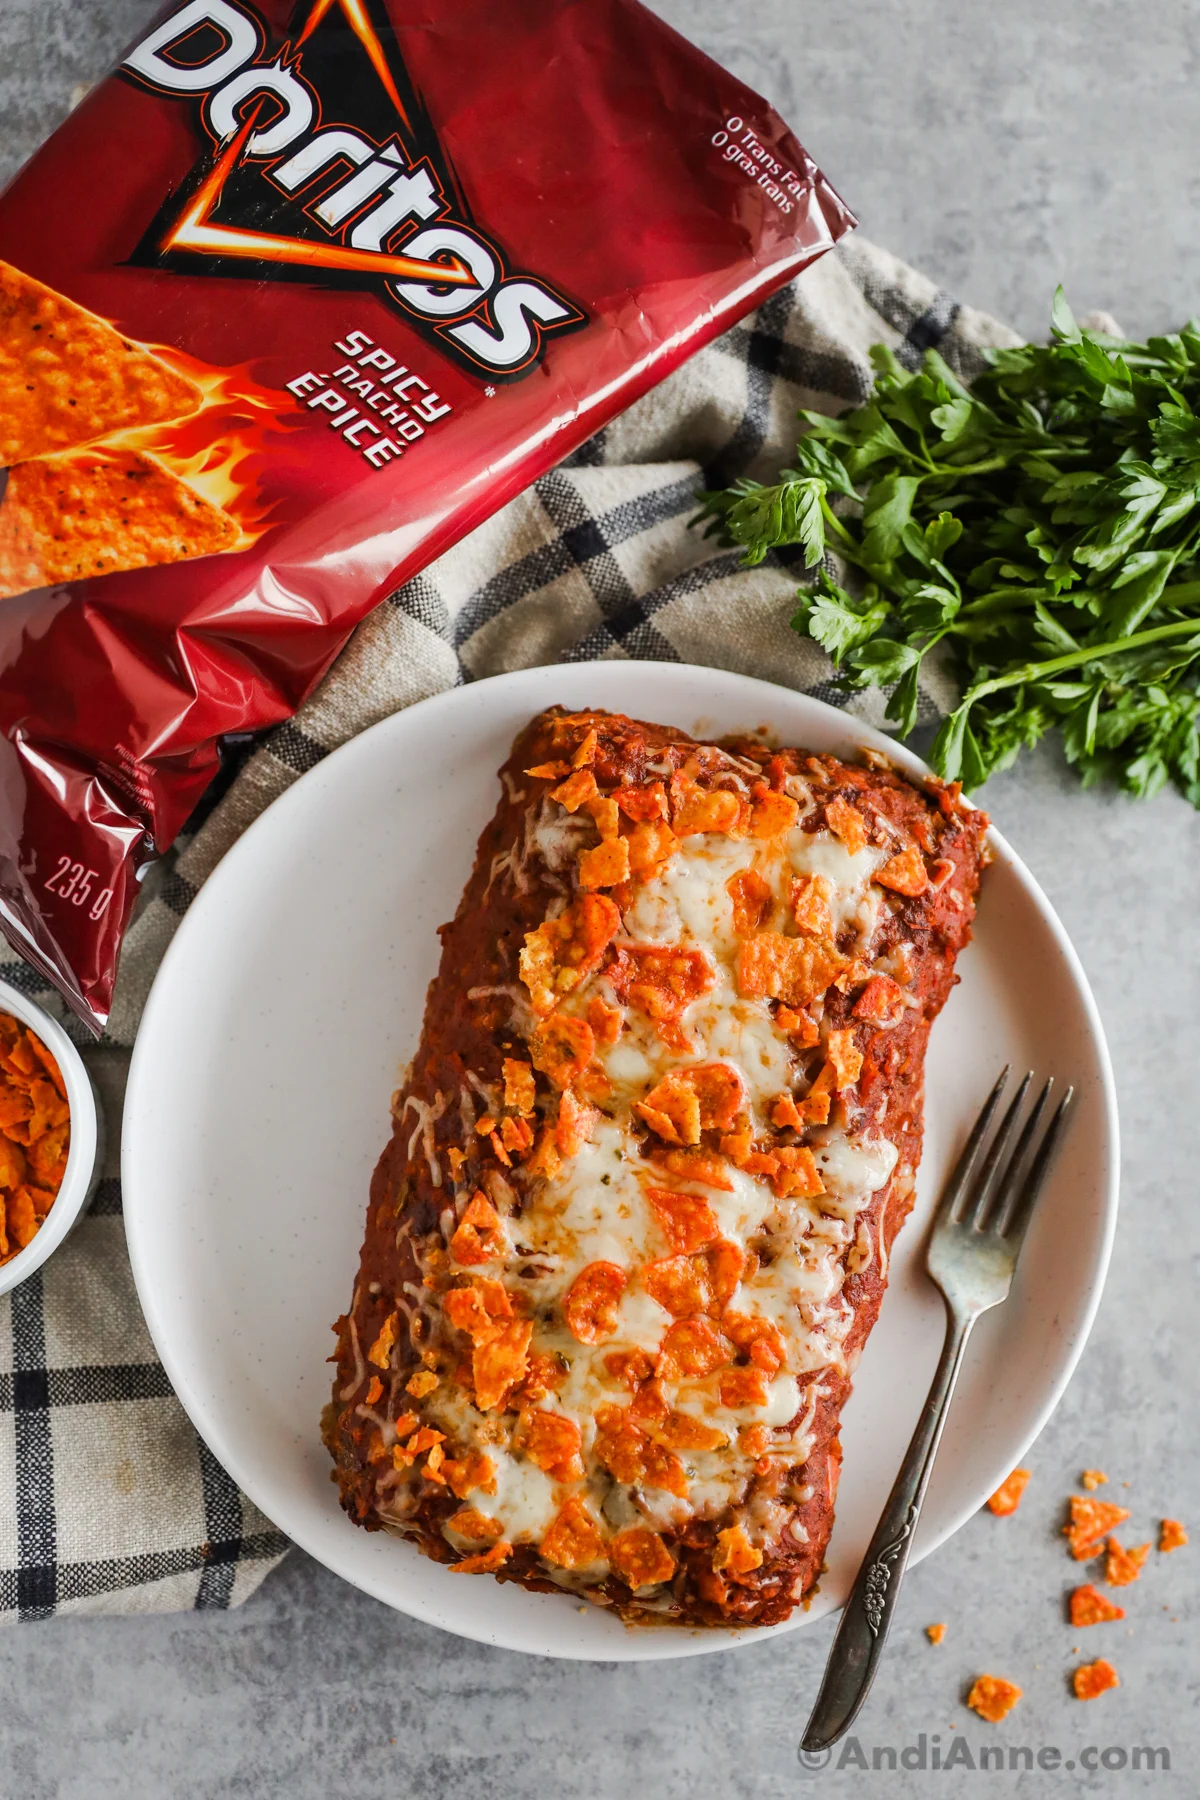 Taco meatloaf on a white plate with a fork. A bag of Doritos, parsley and kitchen towel surround it.